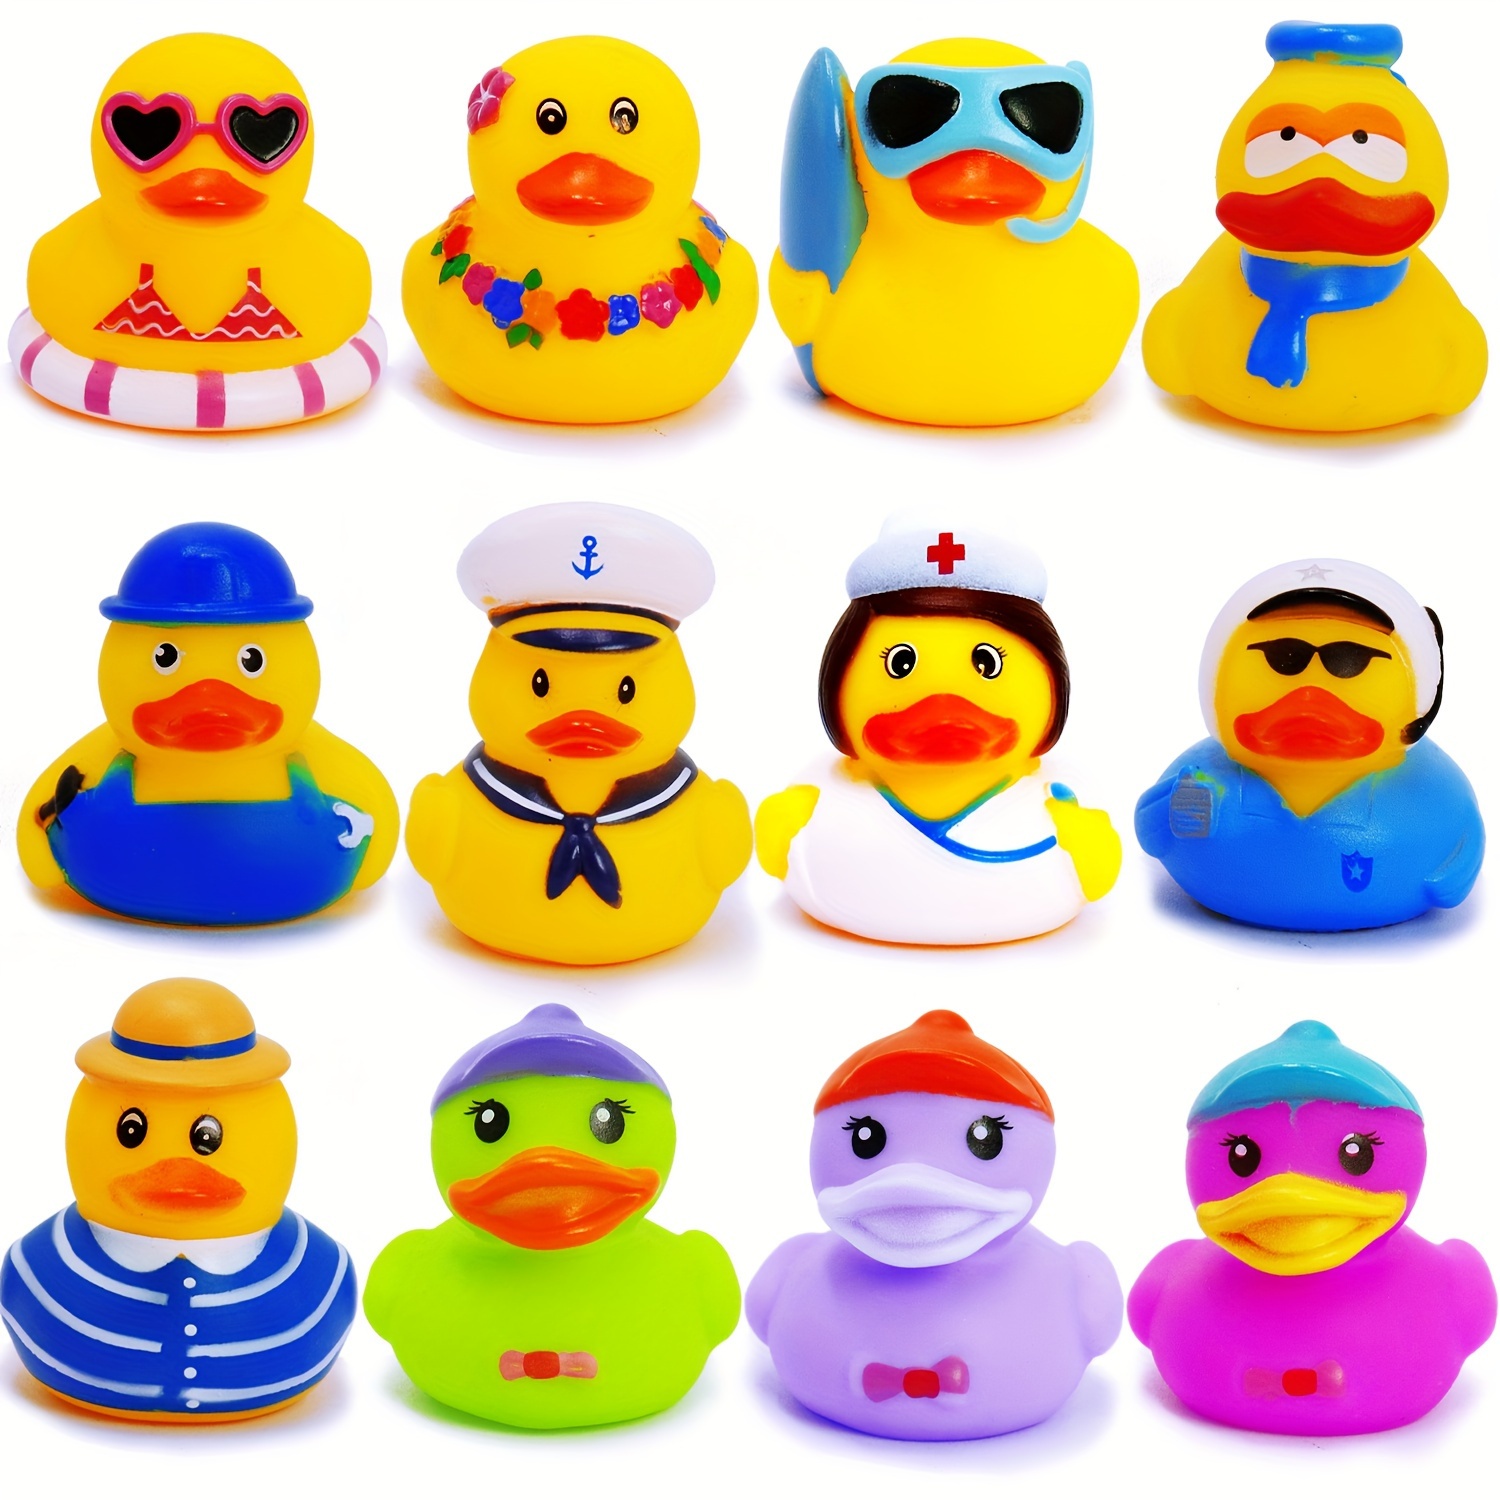 

12pcs Christmas Duck Toys, Colorful Floating Yellow Duck Squeaky Bath Duck, Creative Classroom Award Christmas Stockings Halloween Valentine's Day Birthday Decoration Party Gifts Easter Gift